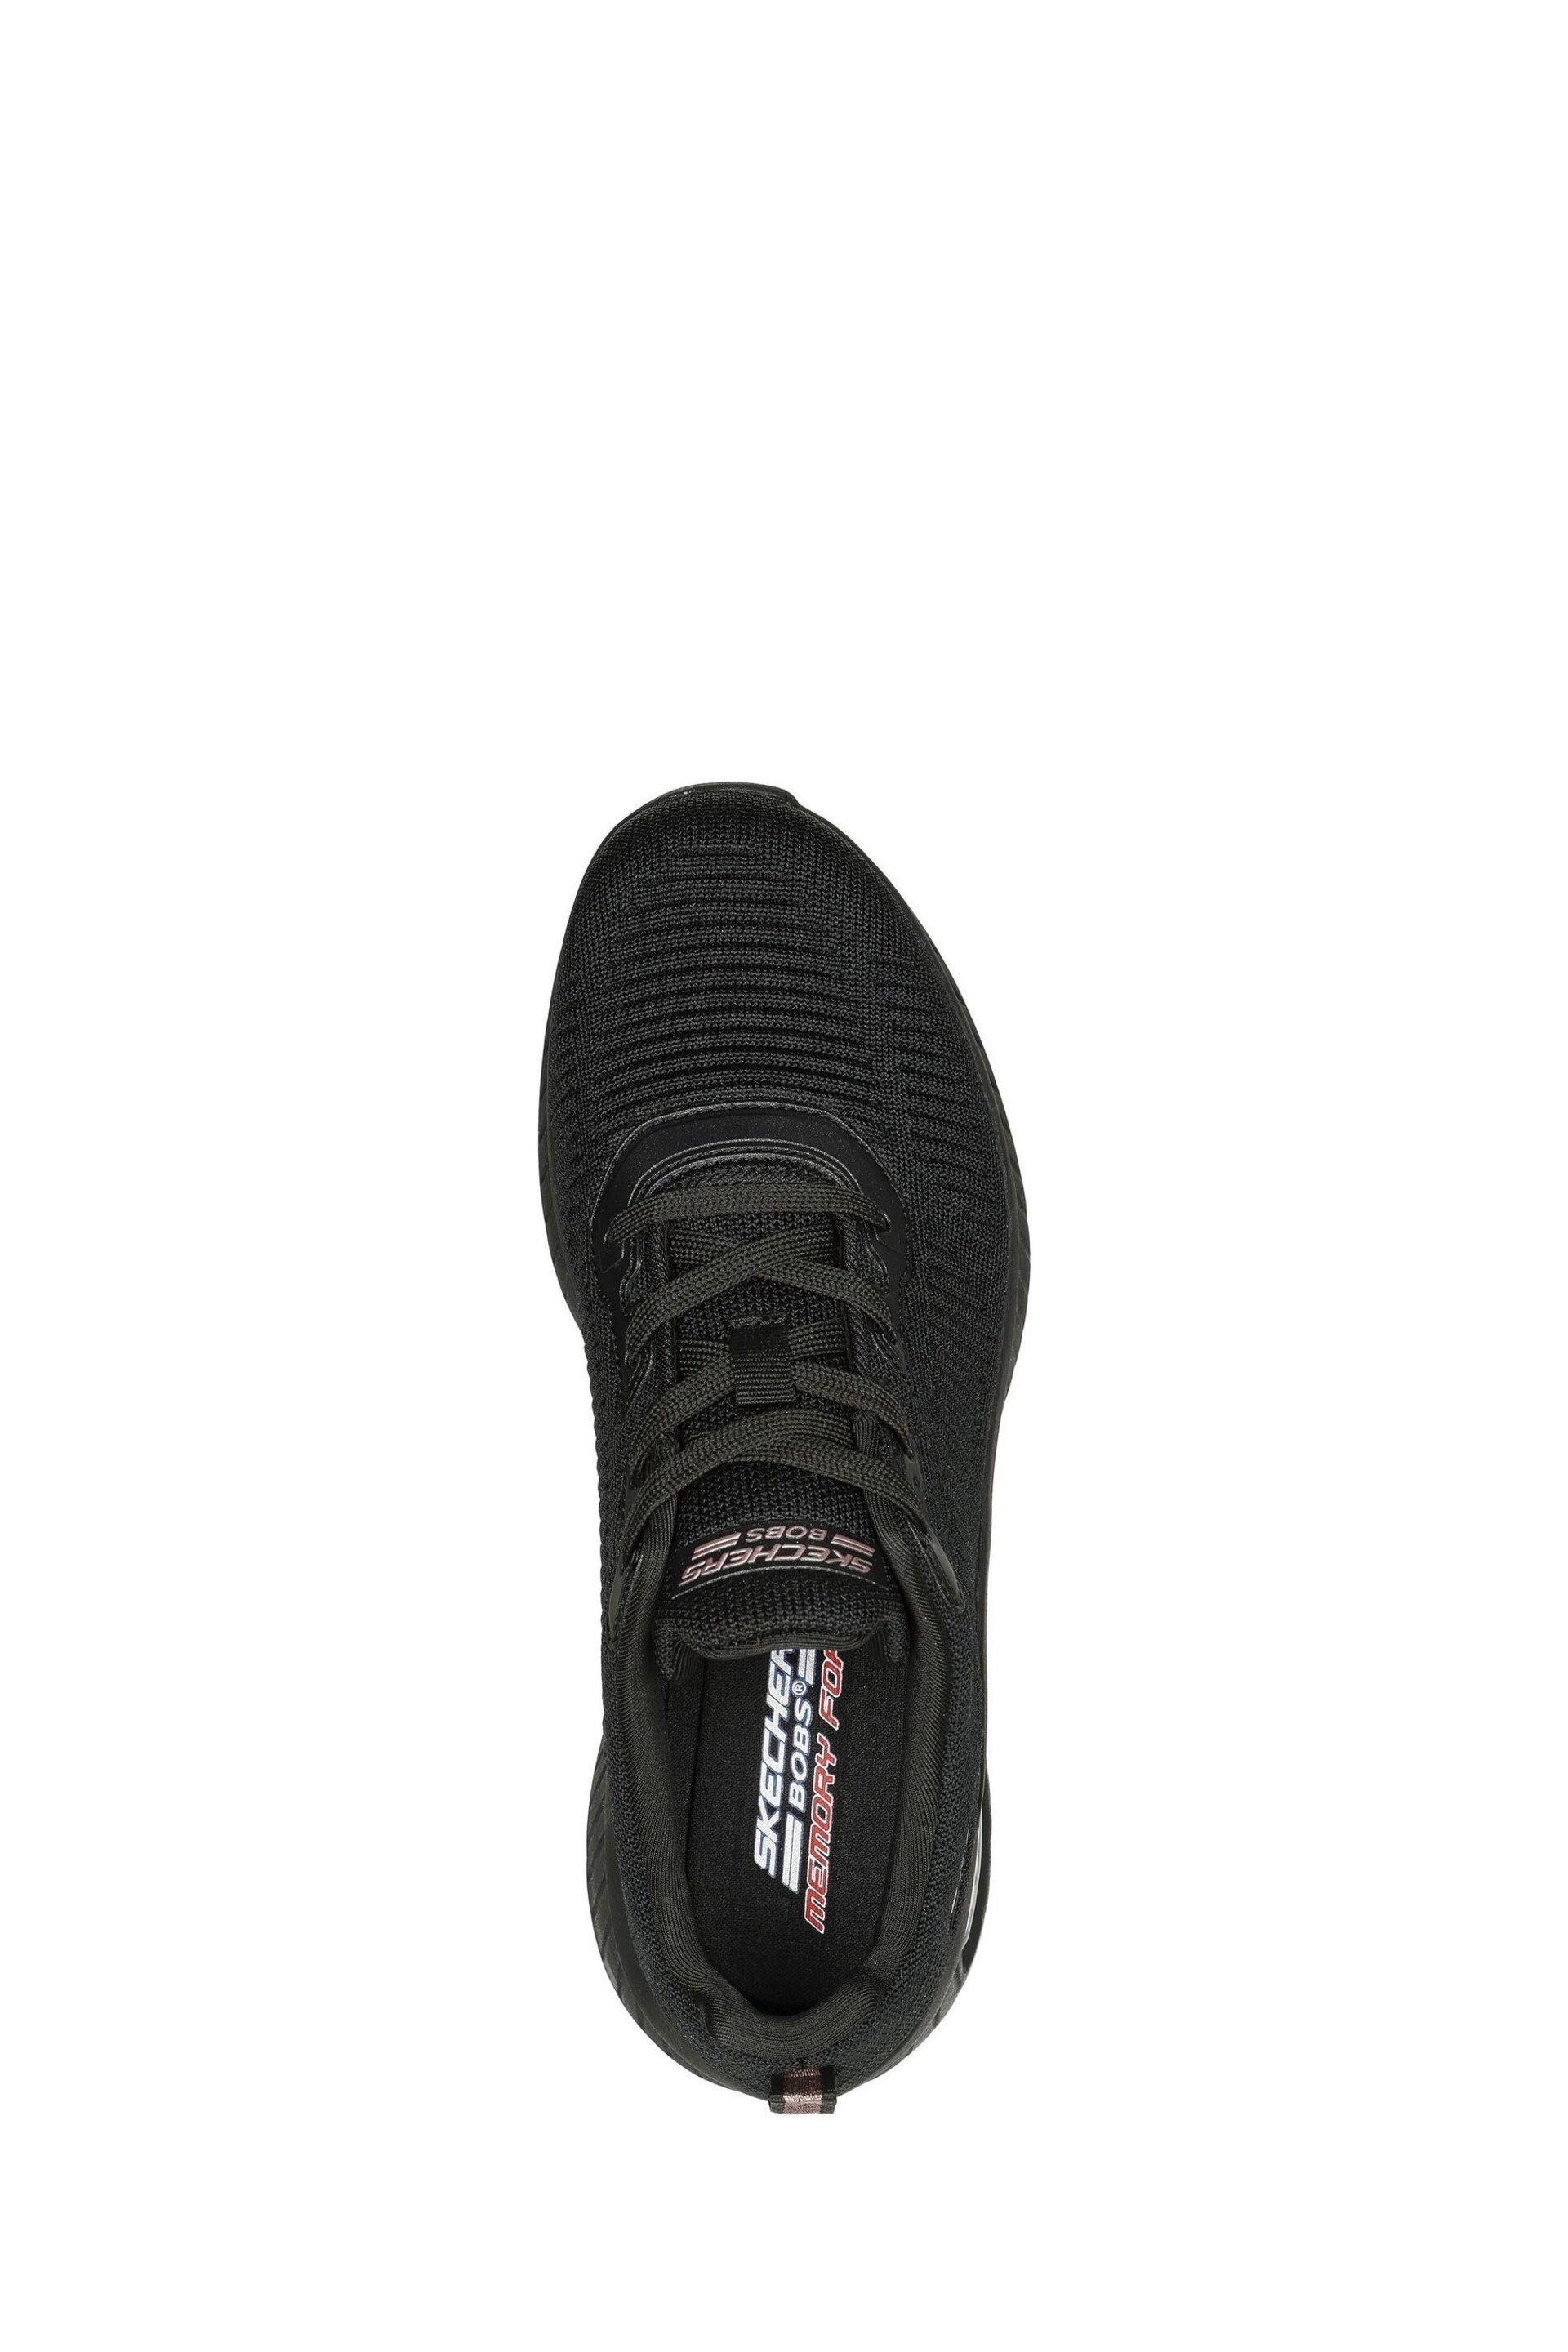 Skechers Black Squad Air Womens Trainers - Image 4 of 5